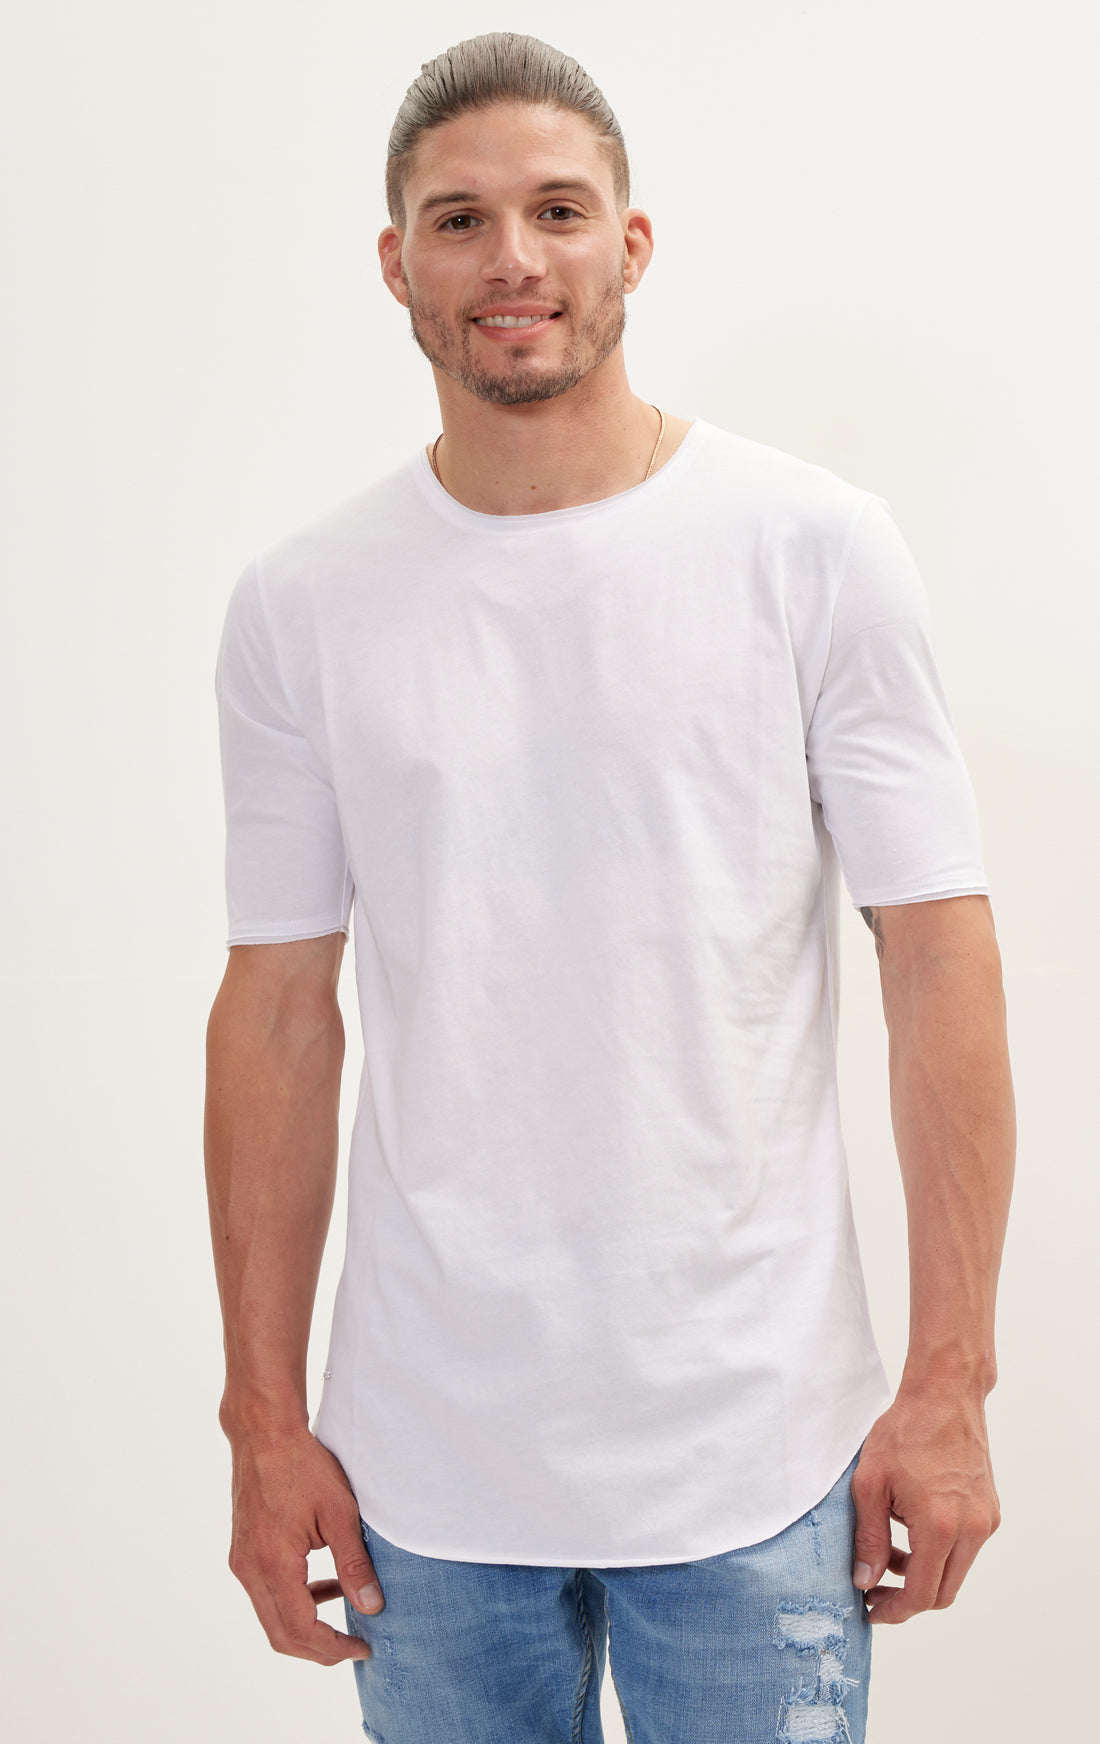 Nr. 8206 WEISSES T-SHIRT